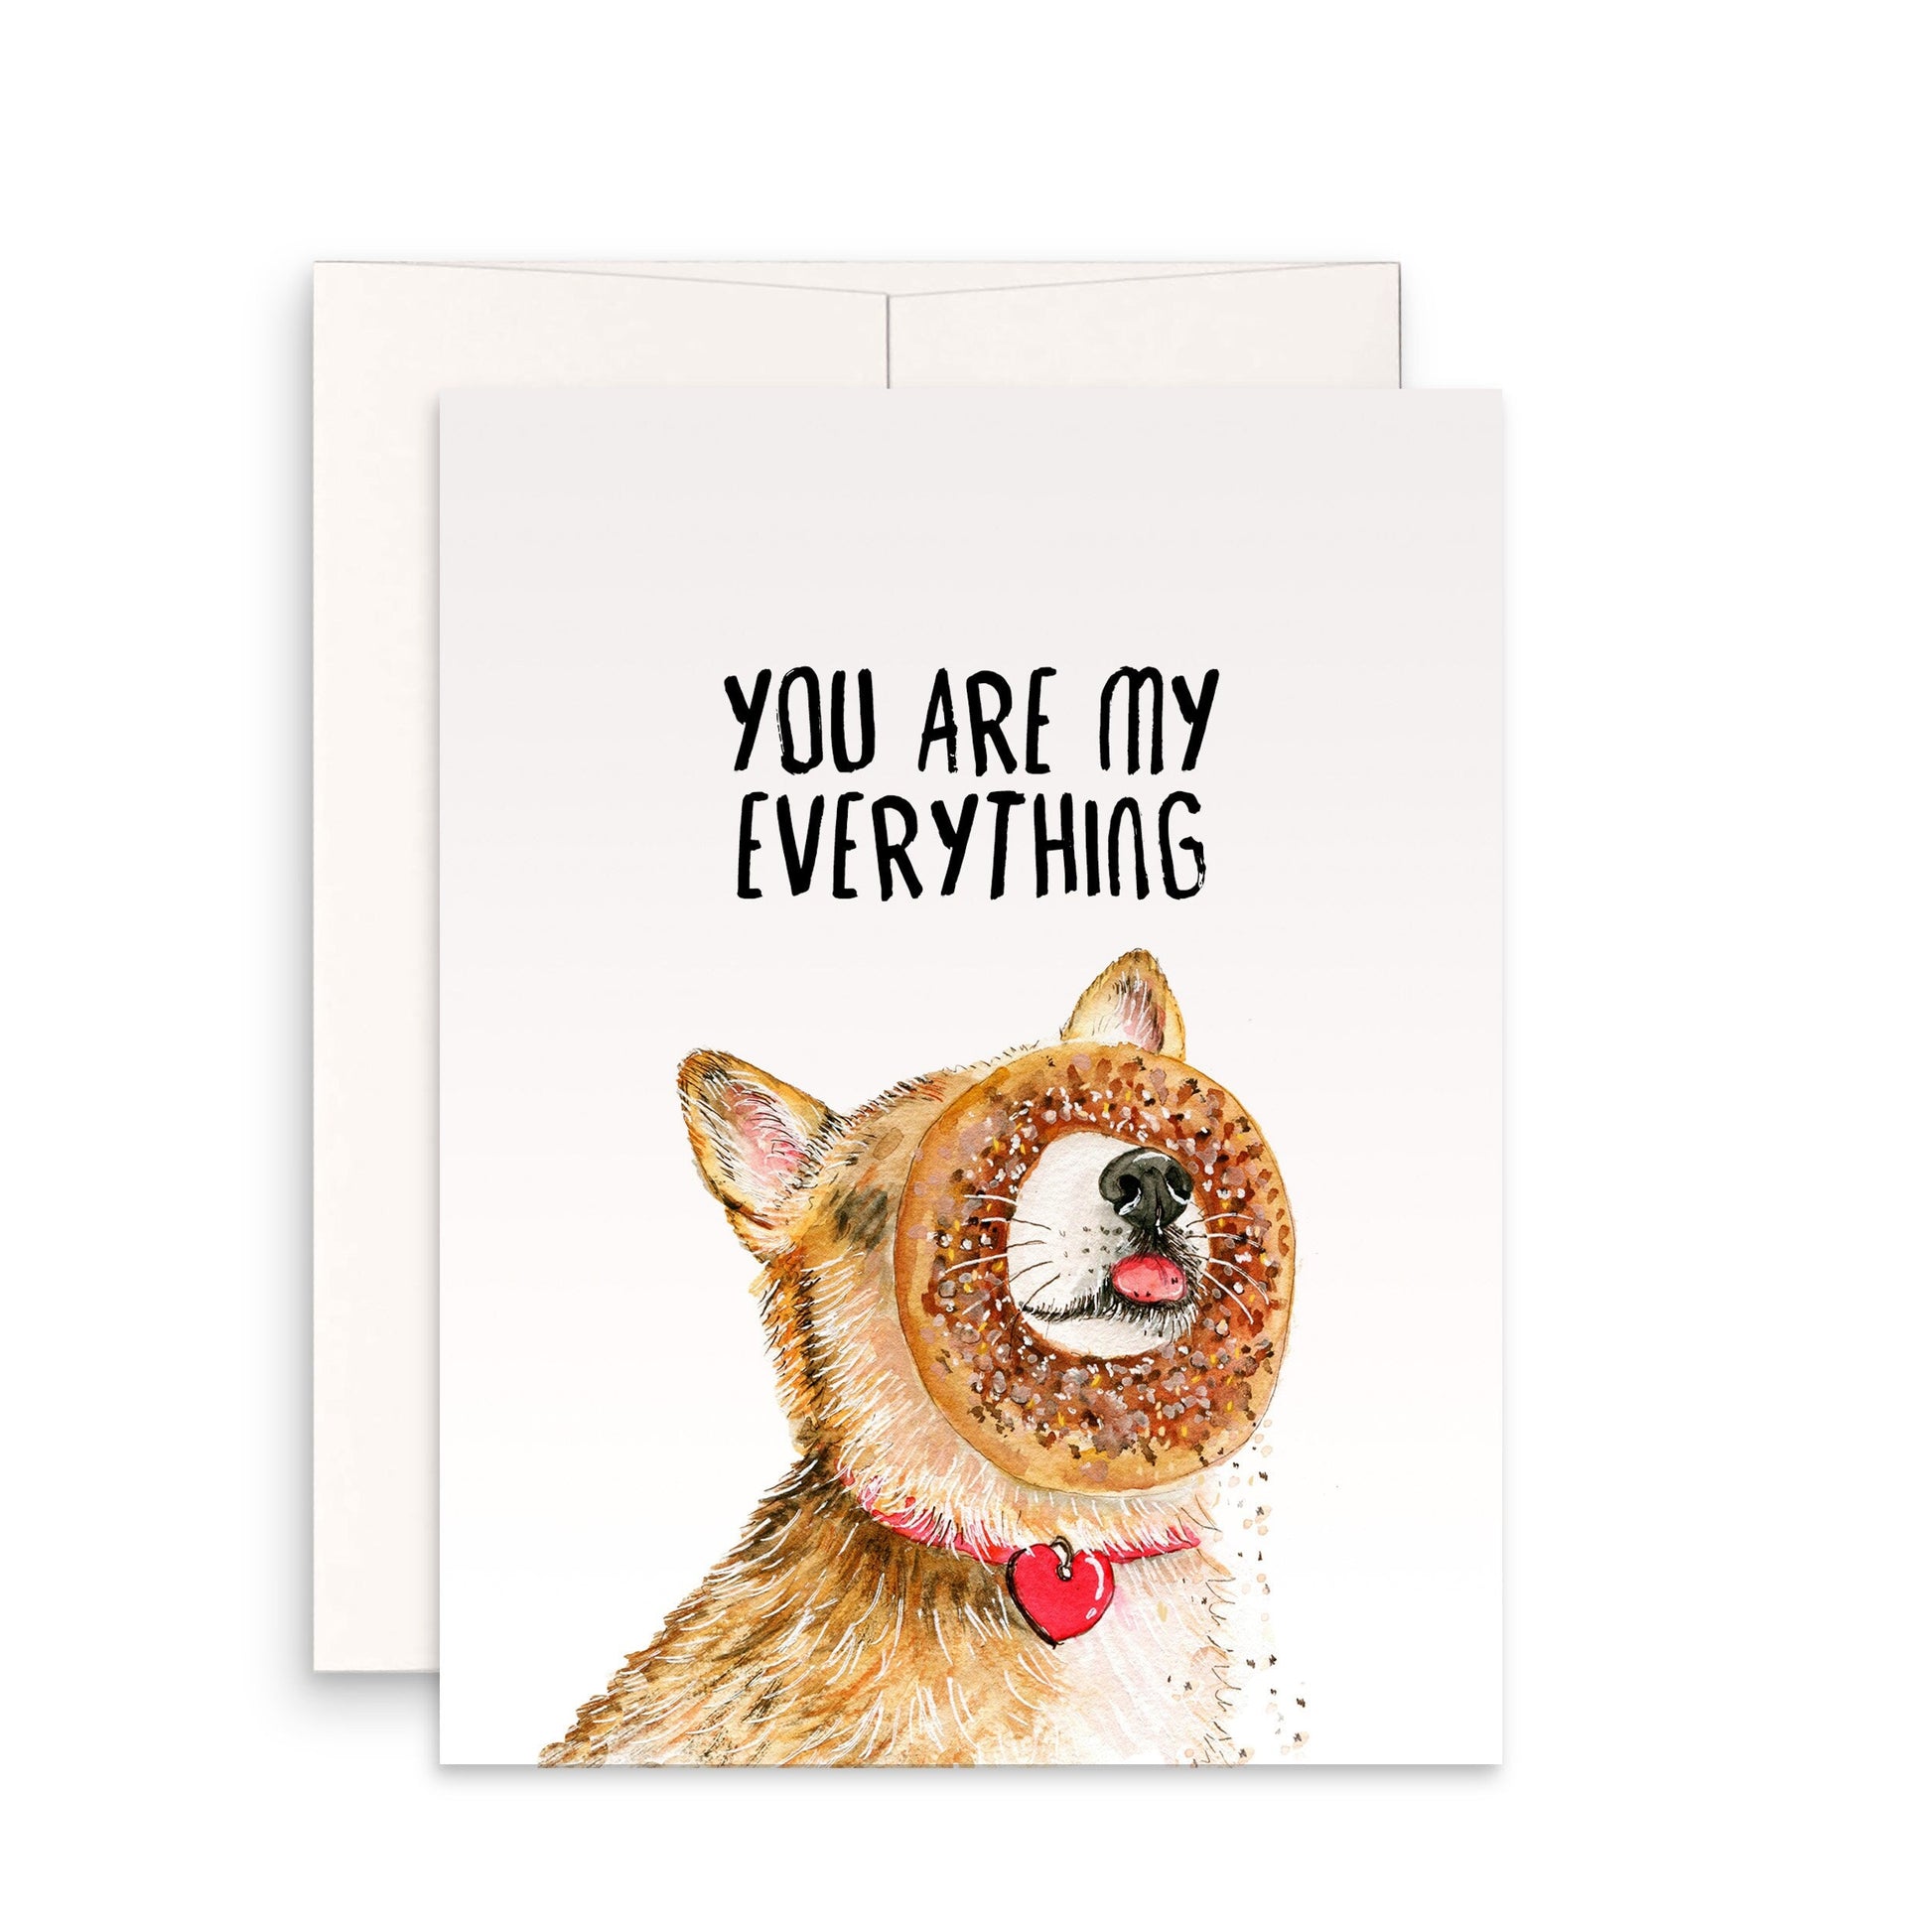 You Are My Everything Bagel - Funny Valentines Day Cards For Boyfriend - Corgi Funny Anniversary Card For Husband Wife - Dog Lover Gifts